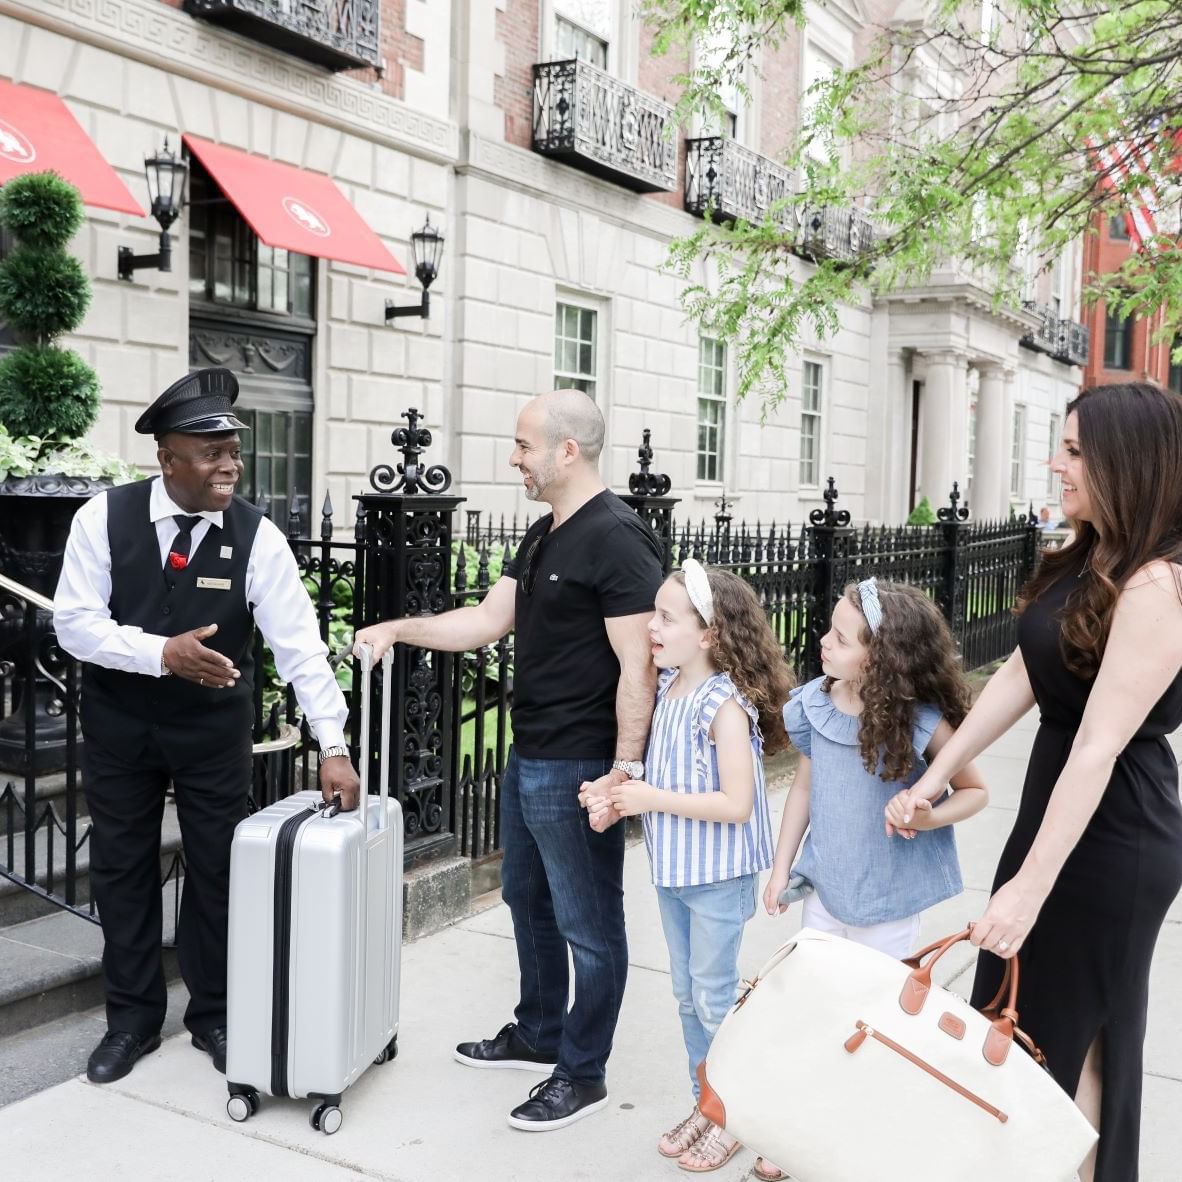 A bellman greeting a family of four in front of The Eliot Hotel